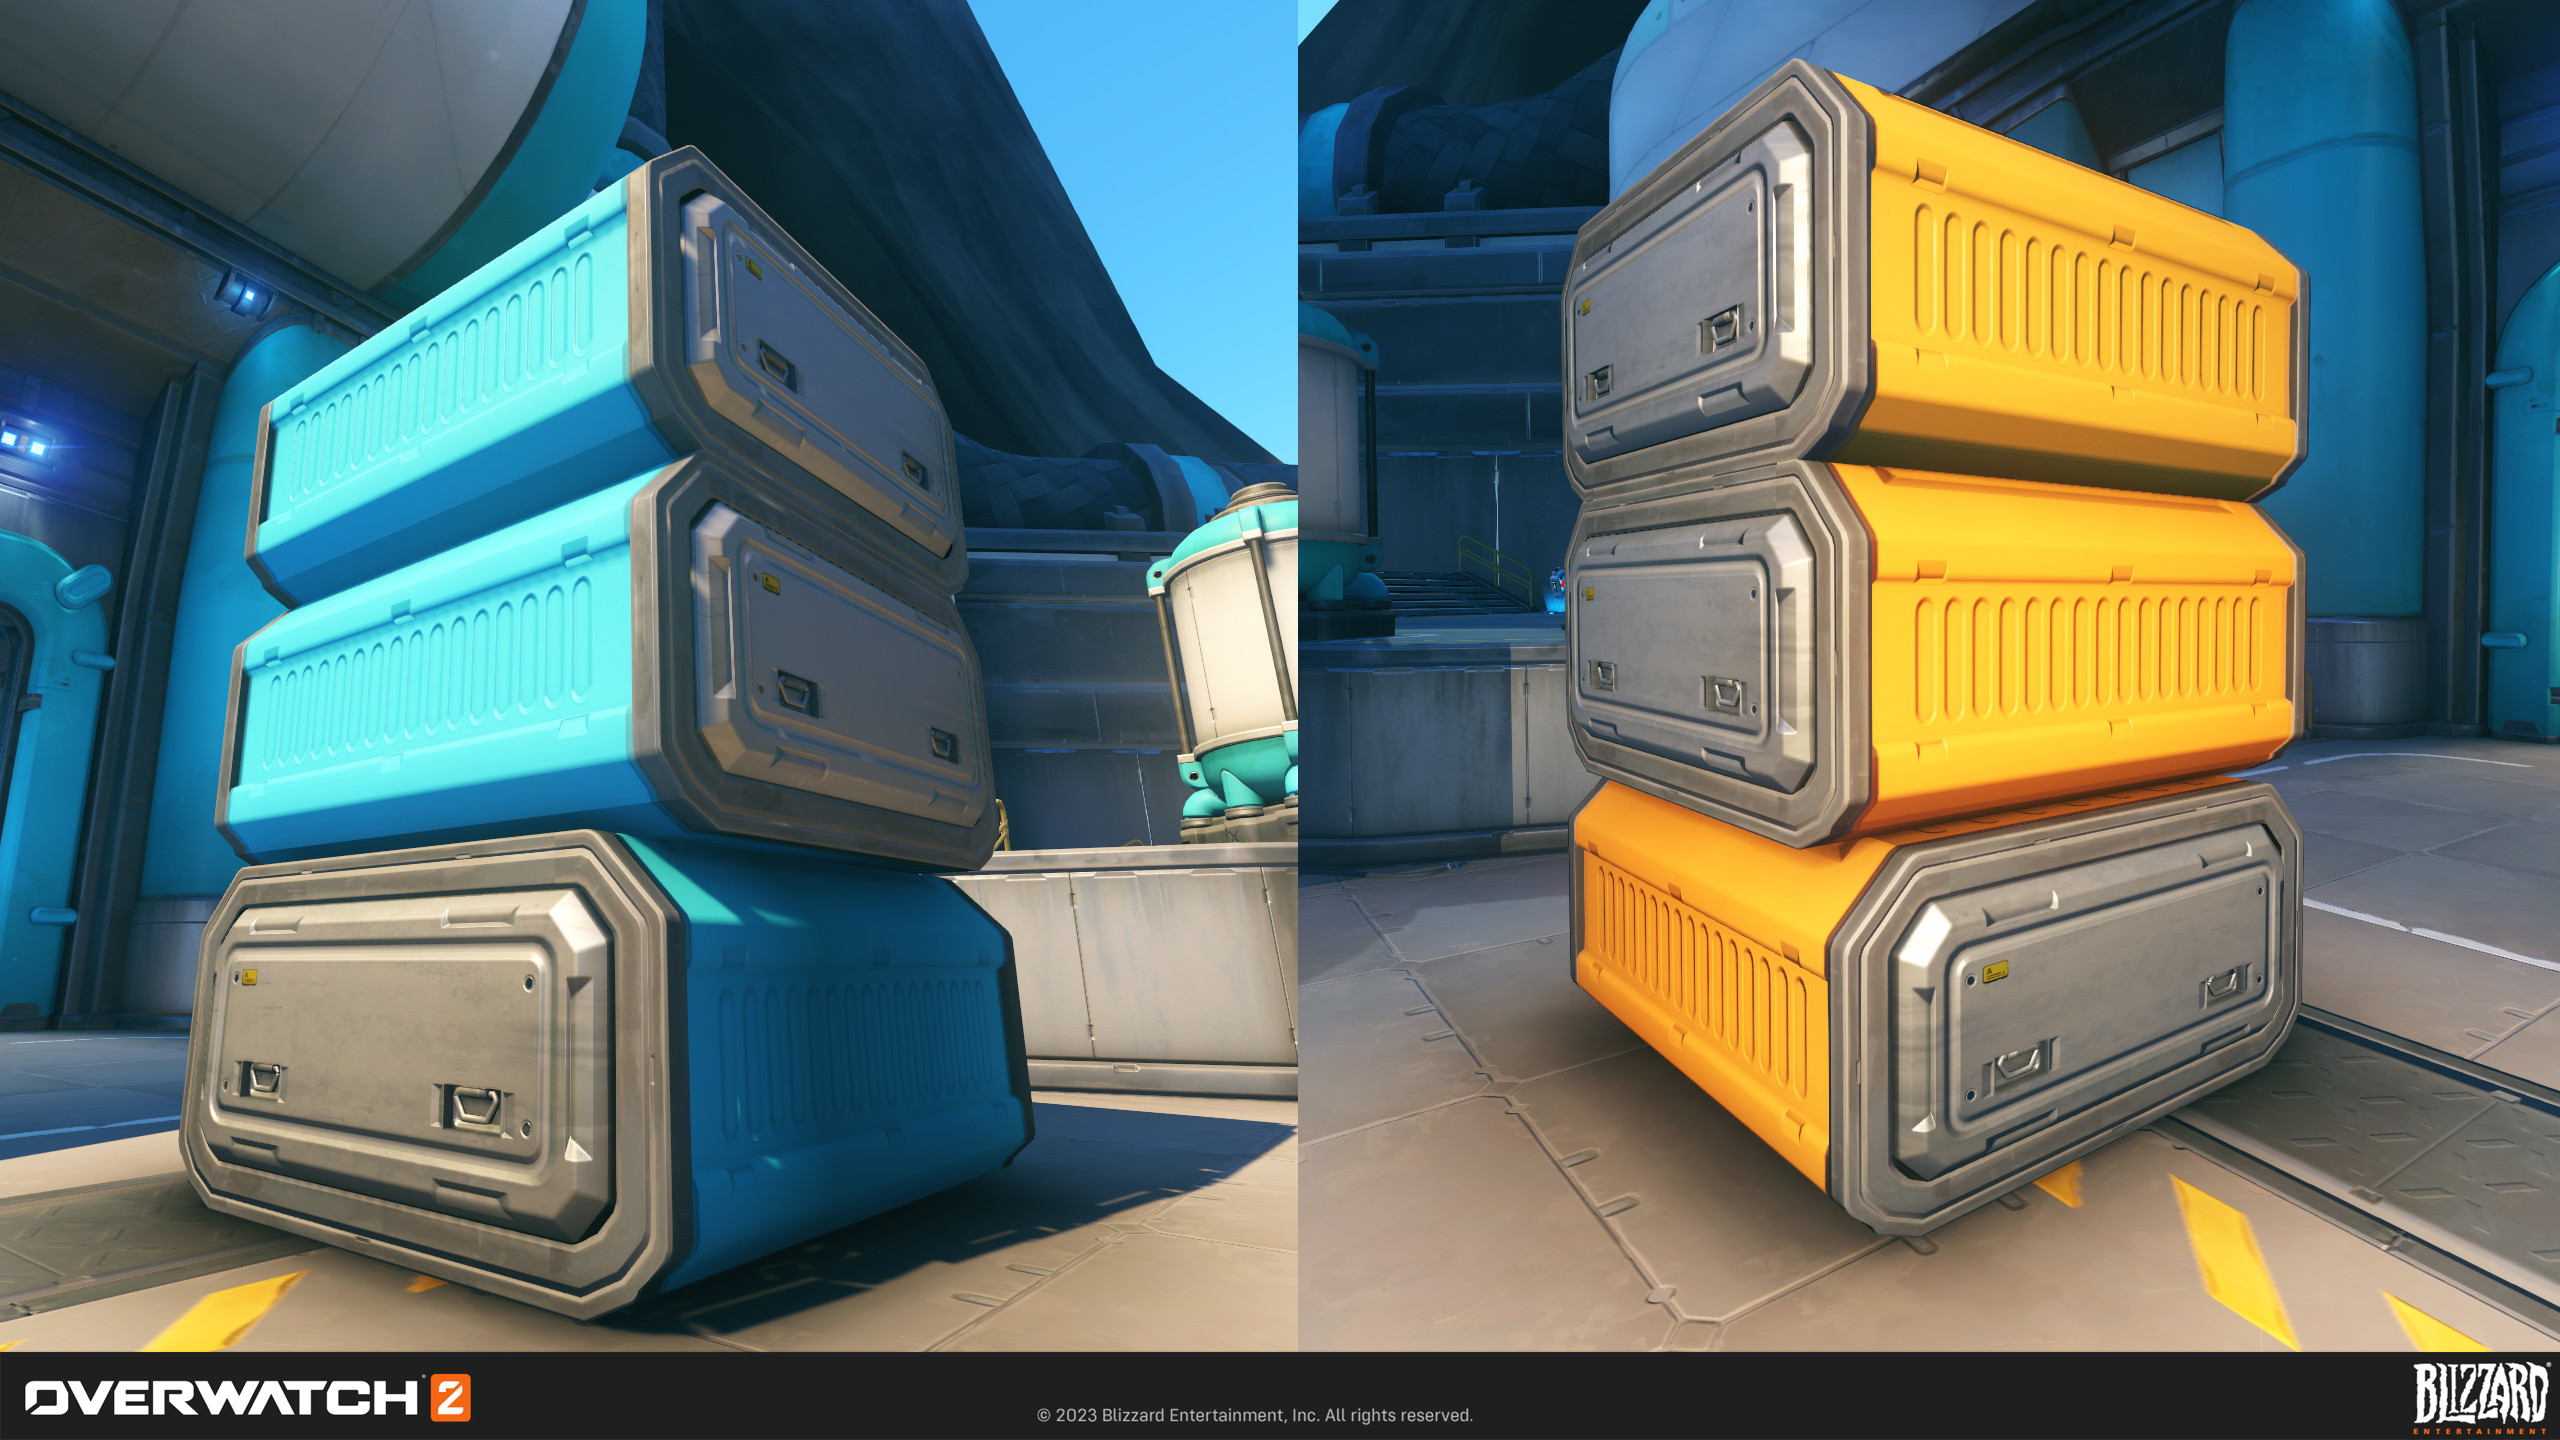 I remodeled this crate design from Gibraltar. This asset was redesigned using trimsheets and decal overlay. This allowed us to colorize the asset for this map as well as reduce unnecessary drawcalls.